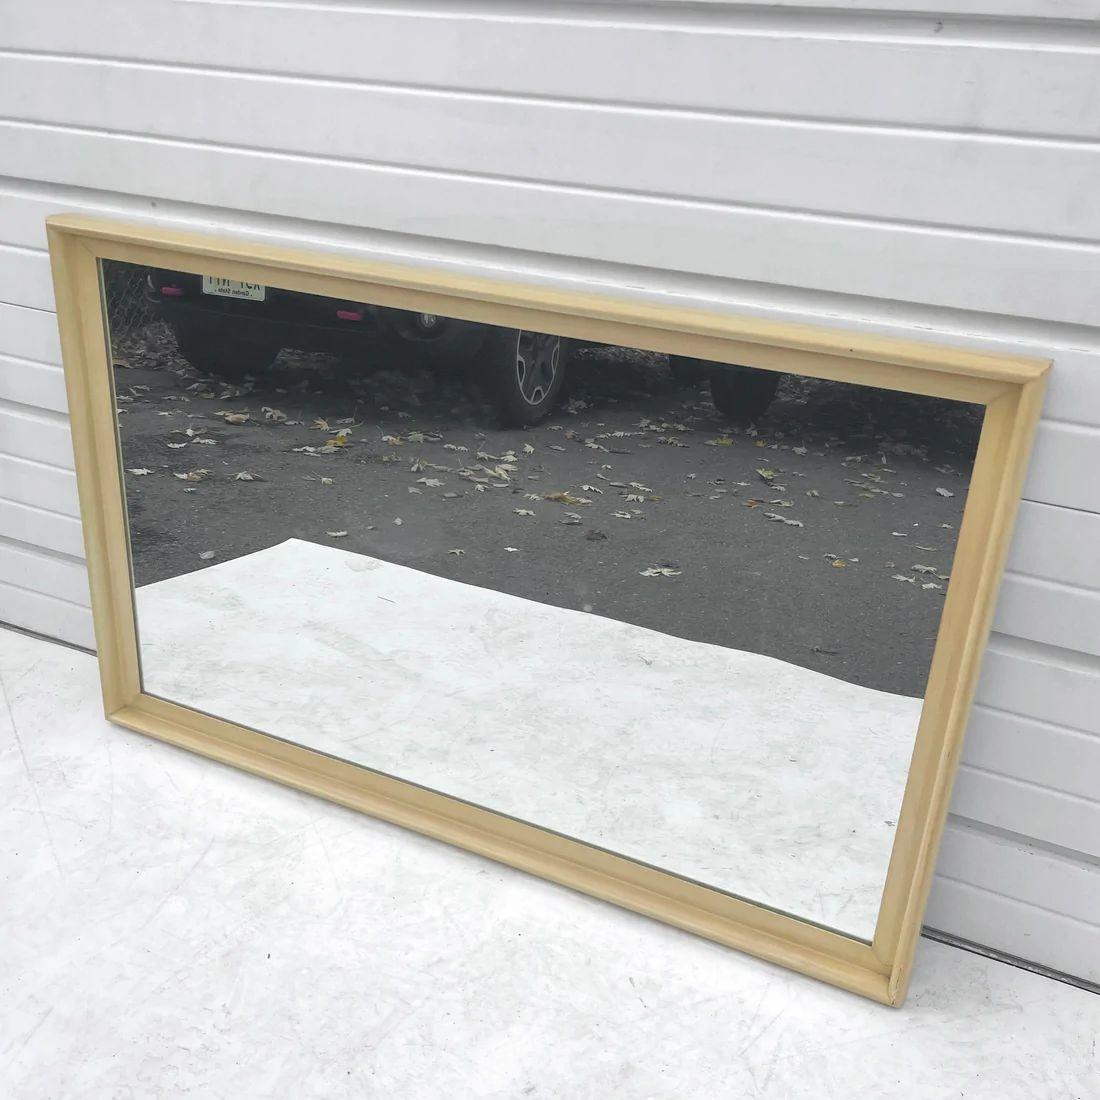 This subtle yet stylish mid-century modern mirror comes from a Paul Frankl for Johnson Brothers bedroom set and features a rounded corner wood frame and comes ready to hang. Matching king size headboard also available- see photos for more